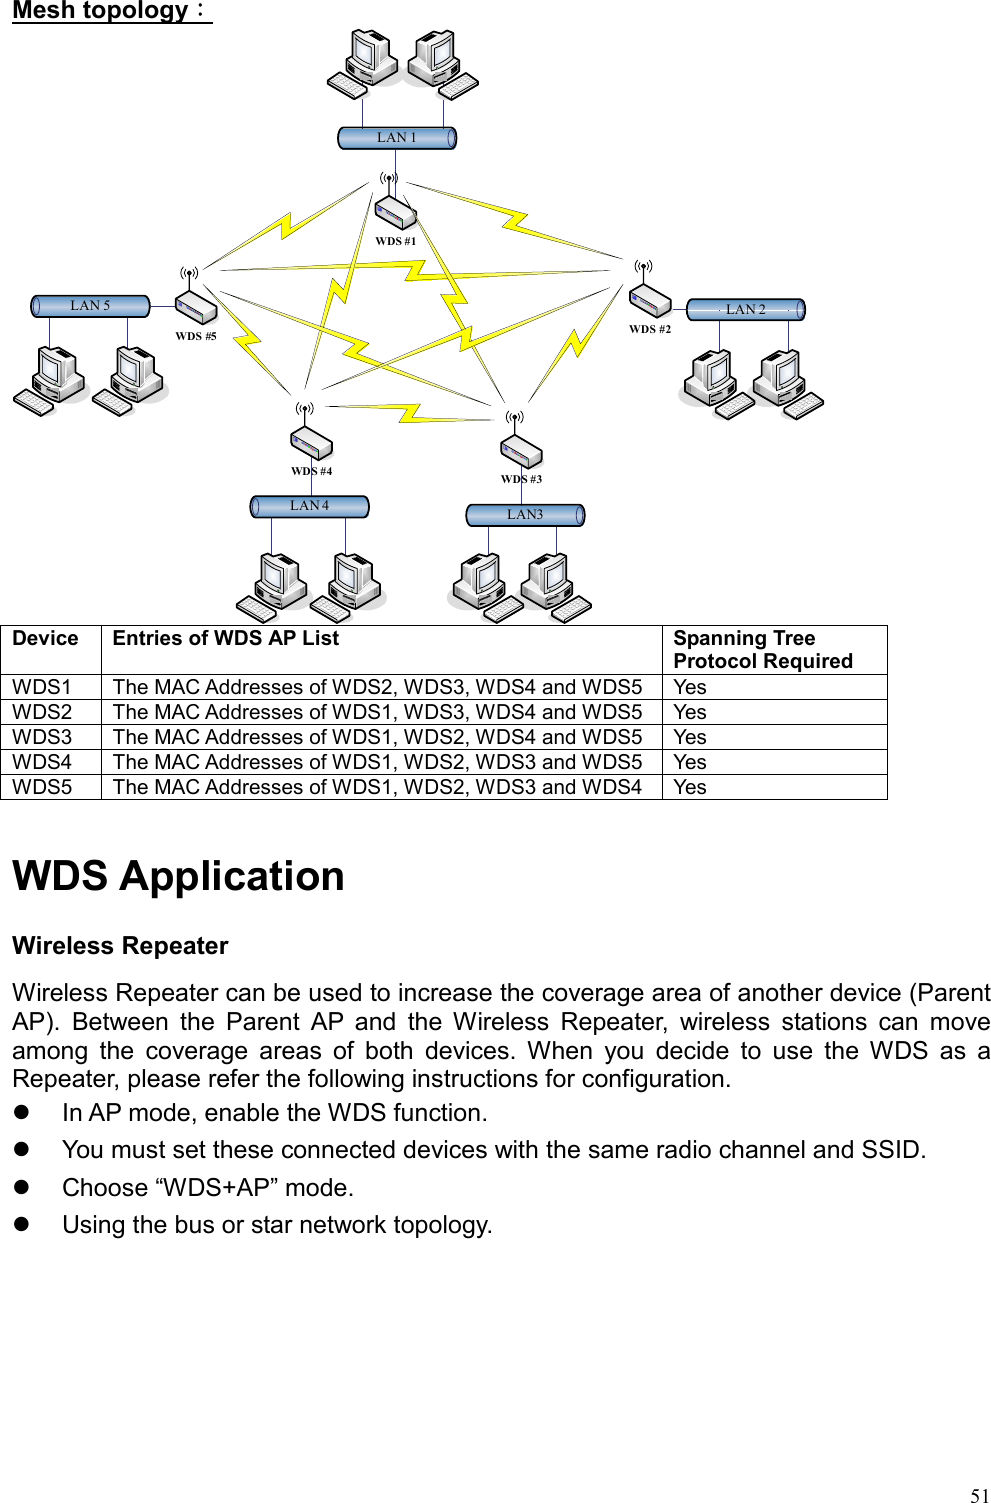  51Mesh topology： LAN3LAN 4LAN 1LAN 2LAN 5WDS #5 WDS #2WDS #3WDS #4WDS #1 Device  Entries of WDS AP List  Spanning Tree Protocol Required WDS1  The MAC Addresses of WDS2, WDS3, WDS4 and WDS5  Yes WDS2  The MAC Addresses of WDS1, WDS3, WDS4 and WDS5  Yes WDS3  The MAC Addresses of WDS1, WDS2, WDS4 and WDS5  Yes WDS4  The MAC Addresses of WDS1, WDS2, WDS3 and WDS5  Yes WDS5  The MAC Addresses of WDS1, WDS2, WDS3 and WDS4  Yes  WDS Application Wireless Repeater Wireless Repeater can be used to increase the coverage area of another device (Parent AP). Between the Parent AP and the Wireless Repeater, wireless stations can move among the coverage areas of both devices. When you decide to use the WDS as a Repeater, please refer the following instructions for configuration.   In AP mode, enable the WDS function.   You must set these connected devices with the same radio channel and SSID.   Choose “WDS+AP” mode.   Using the bus or star network topology. 